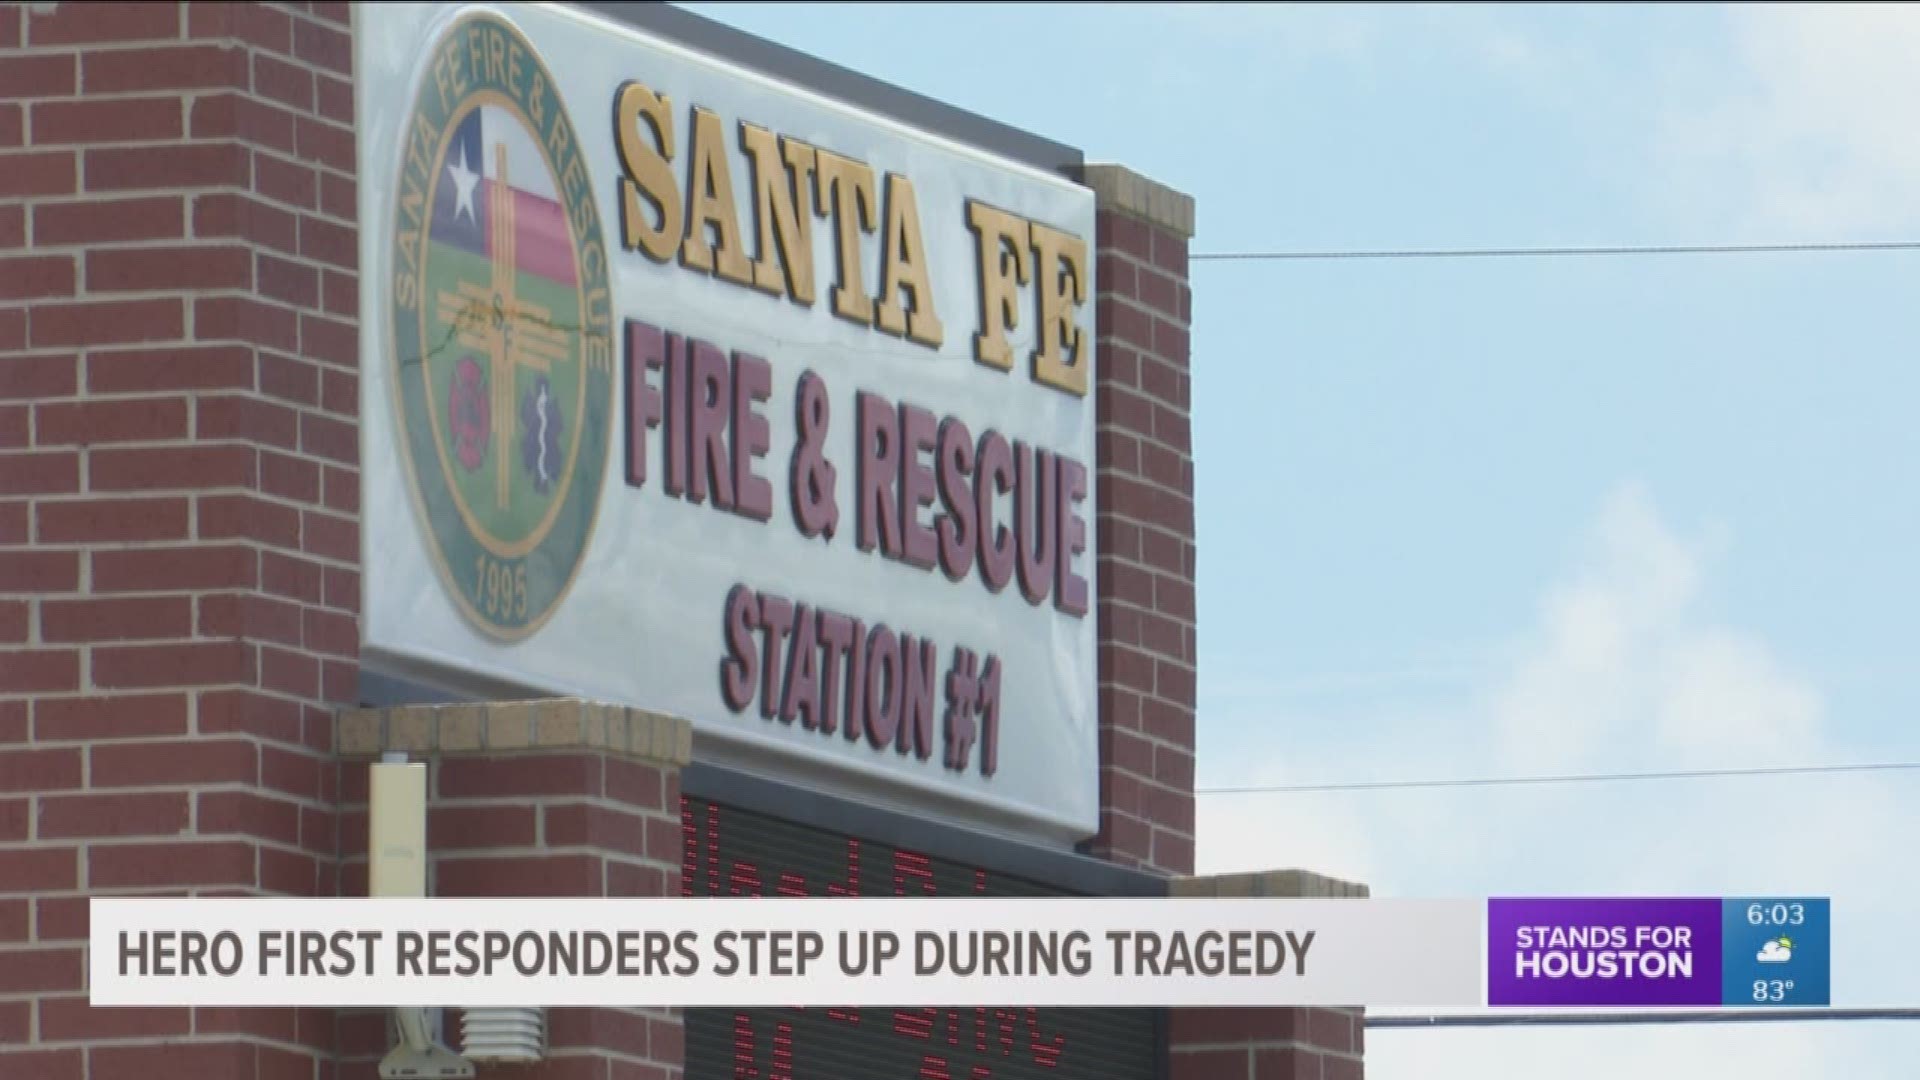 KHOU 11 Top Headlines at 6 p.m. include new information from the Santa Fe ISD Superintendent, Santa Fe volunteer firefighters and EMS step up during the tragedy and parents express mixed emotions about students returning to school. 